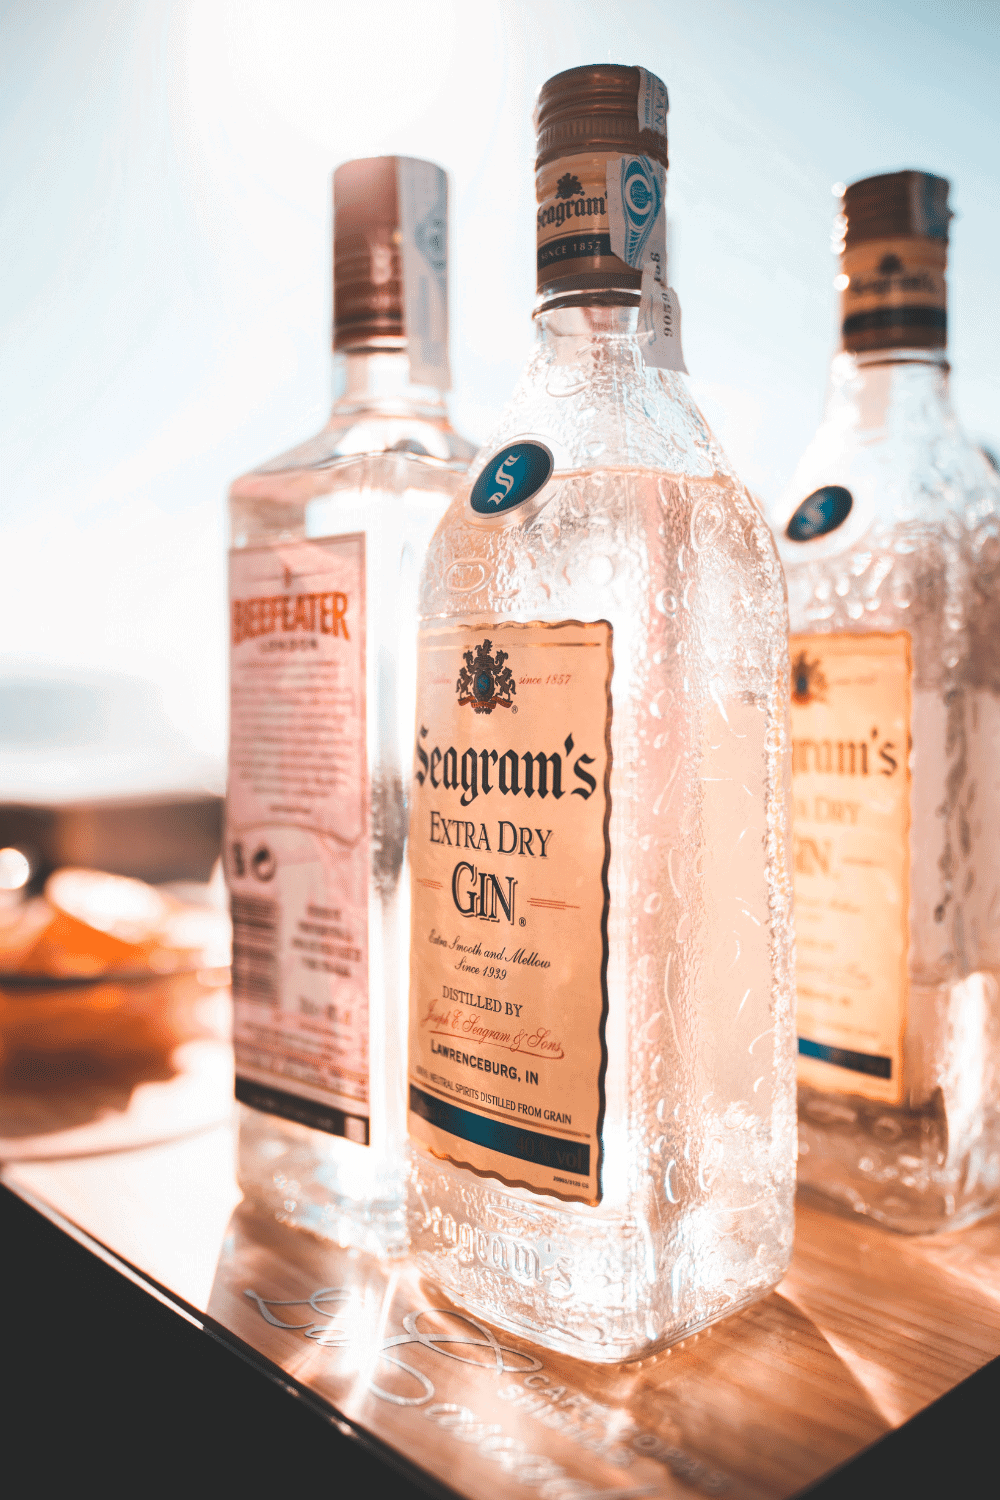 Bottle of Seagrams Gin